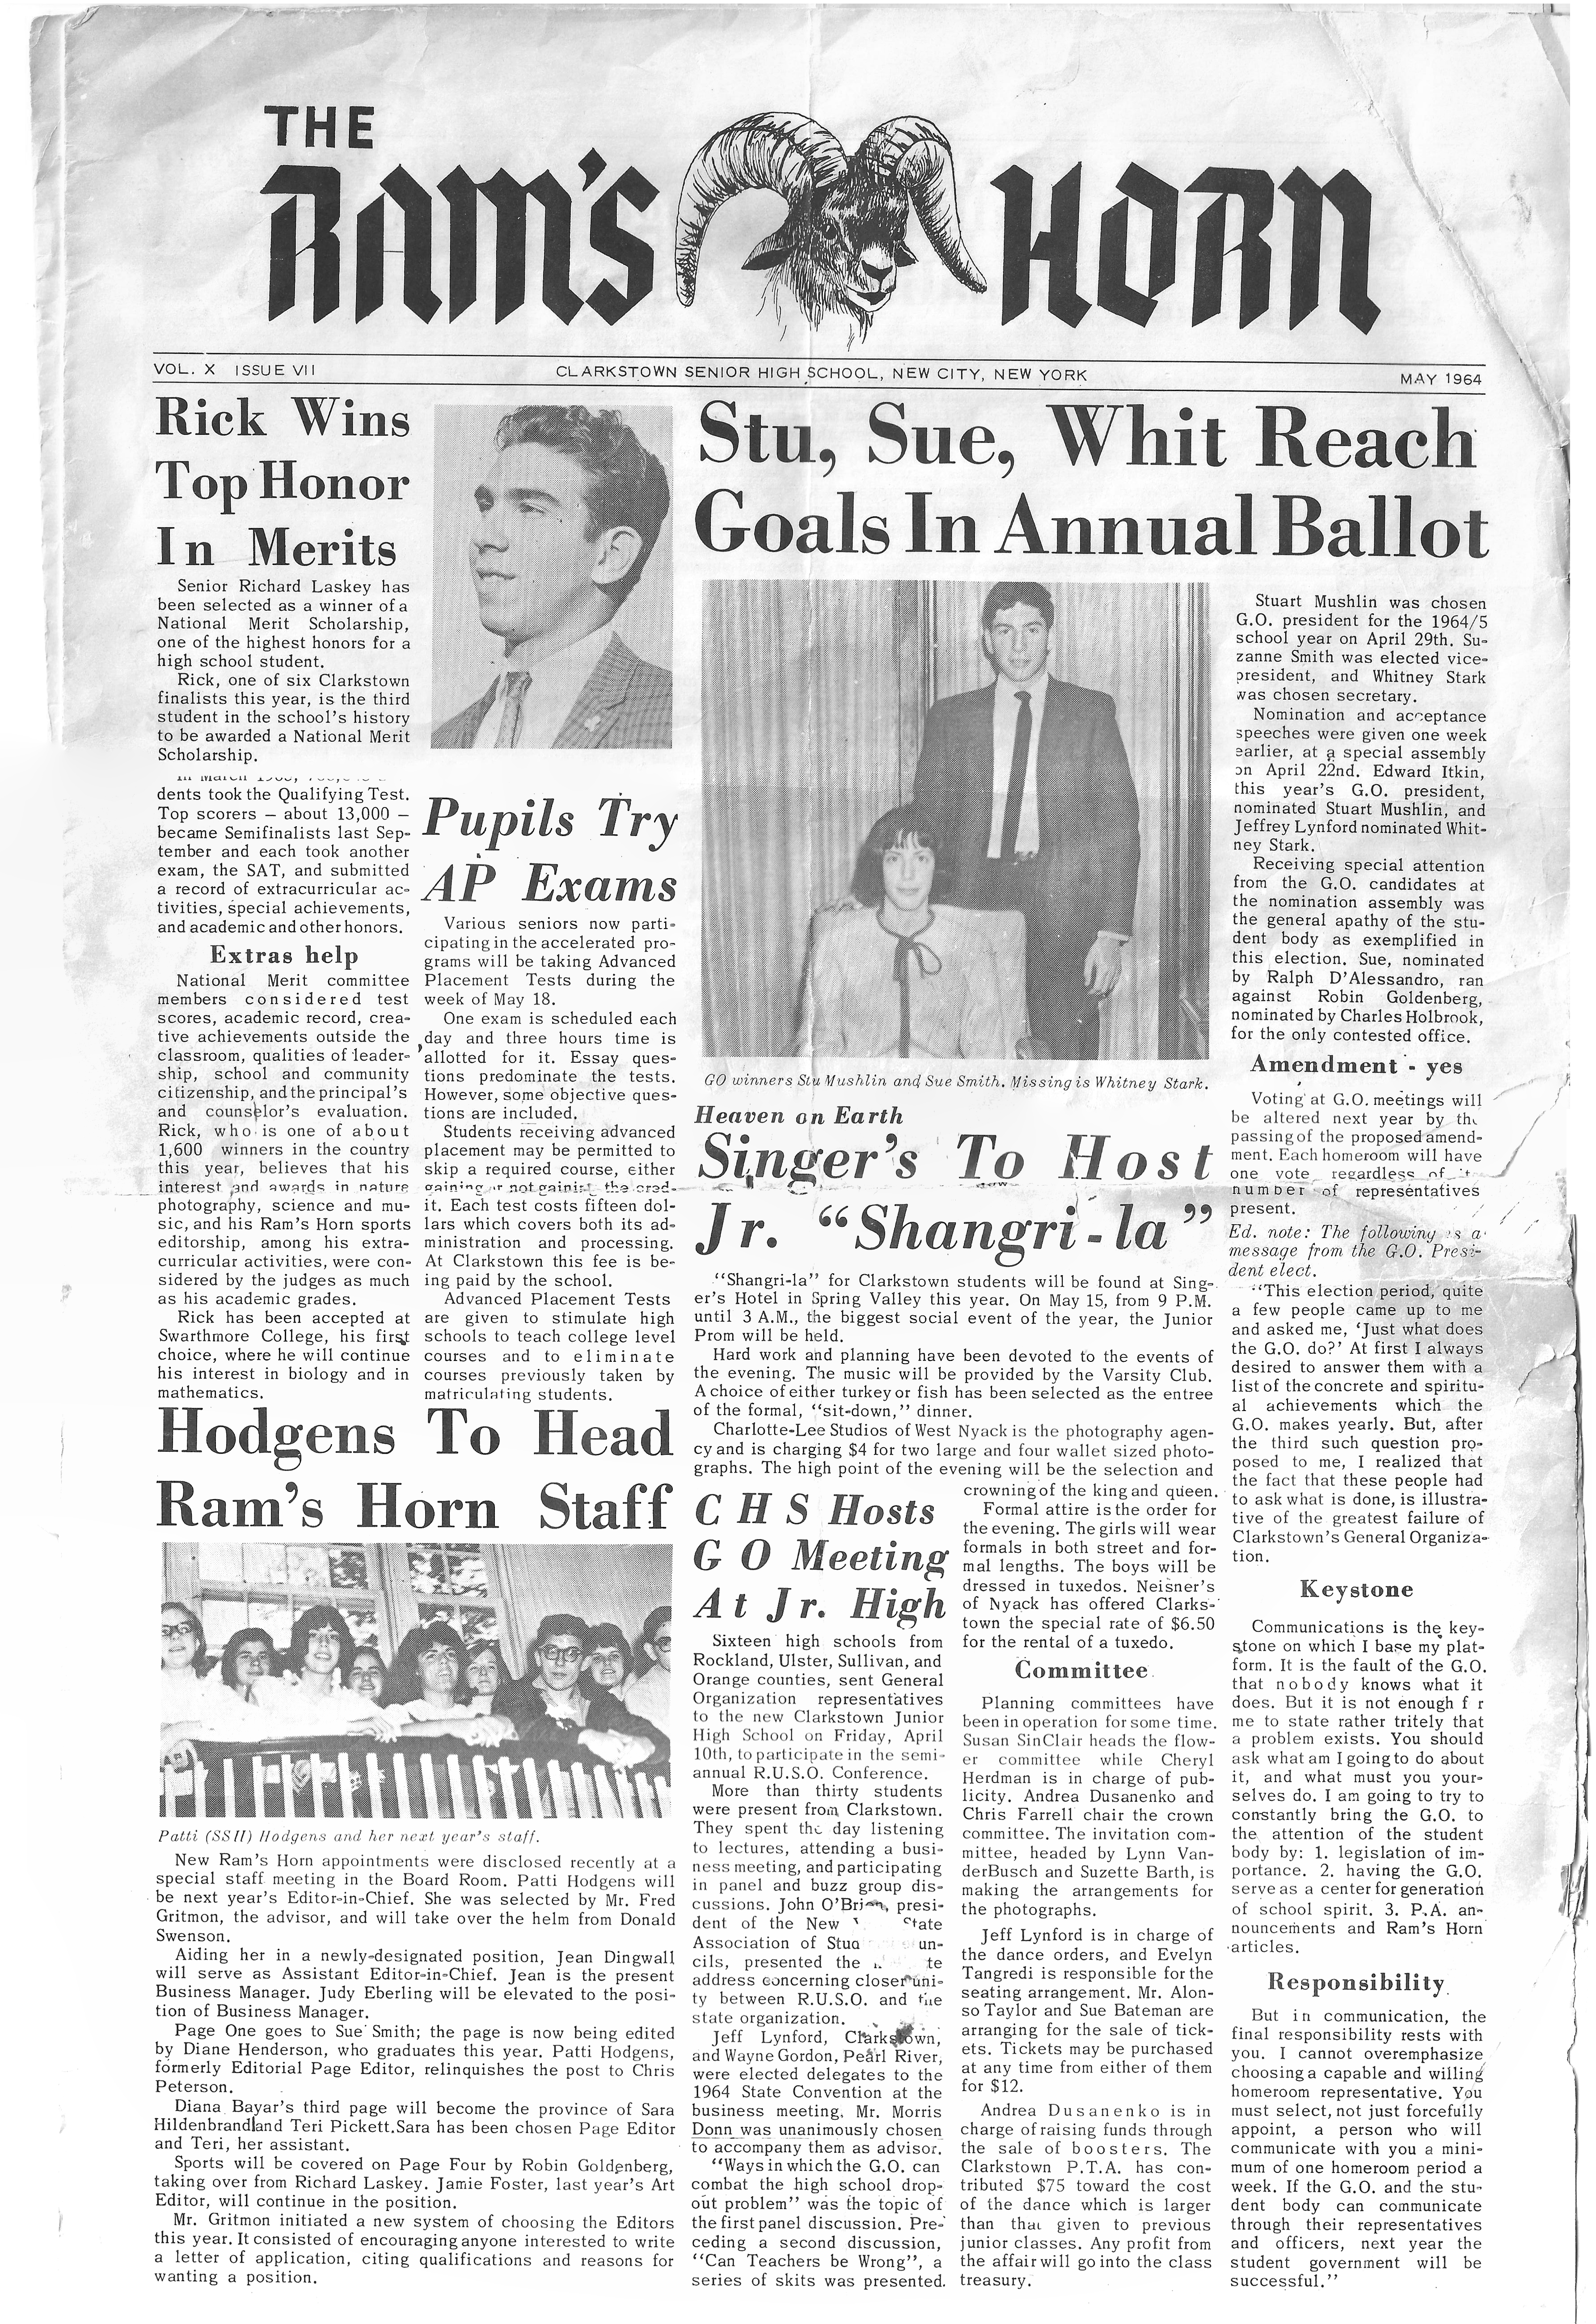 The Ram's Horn - May. '64 - Page 1